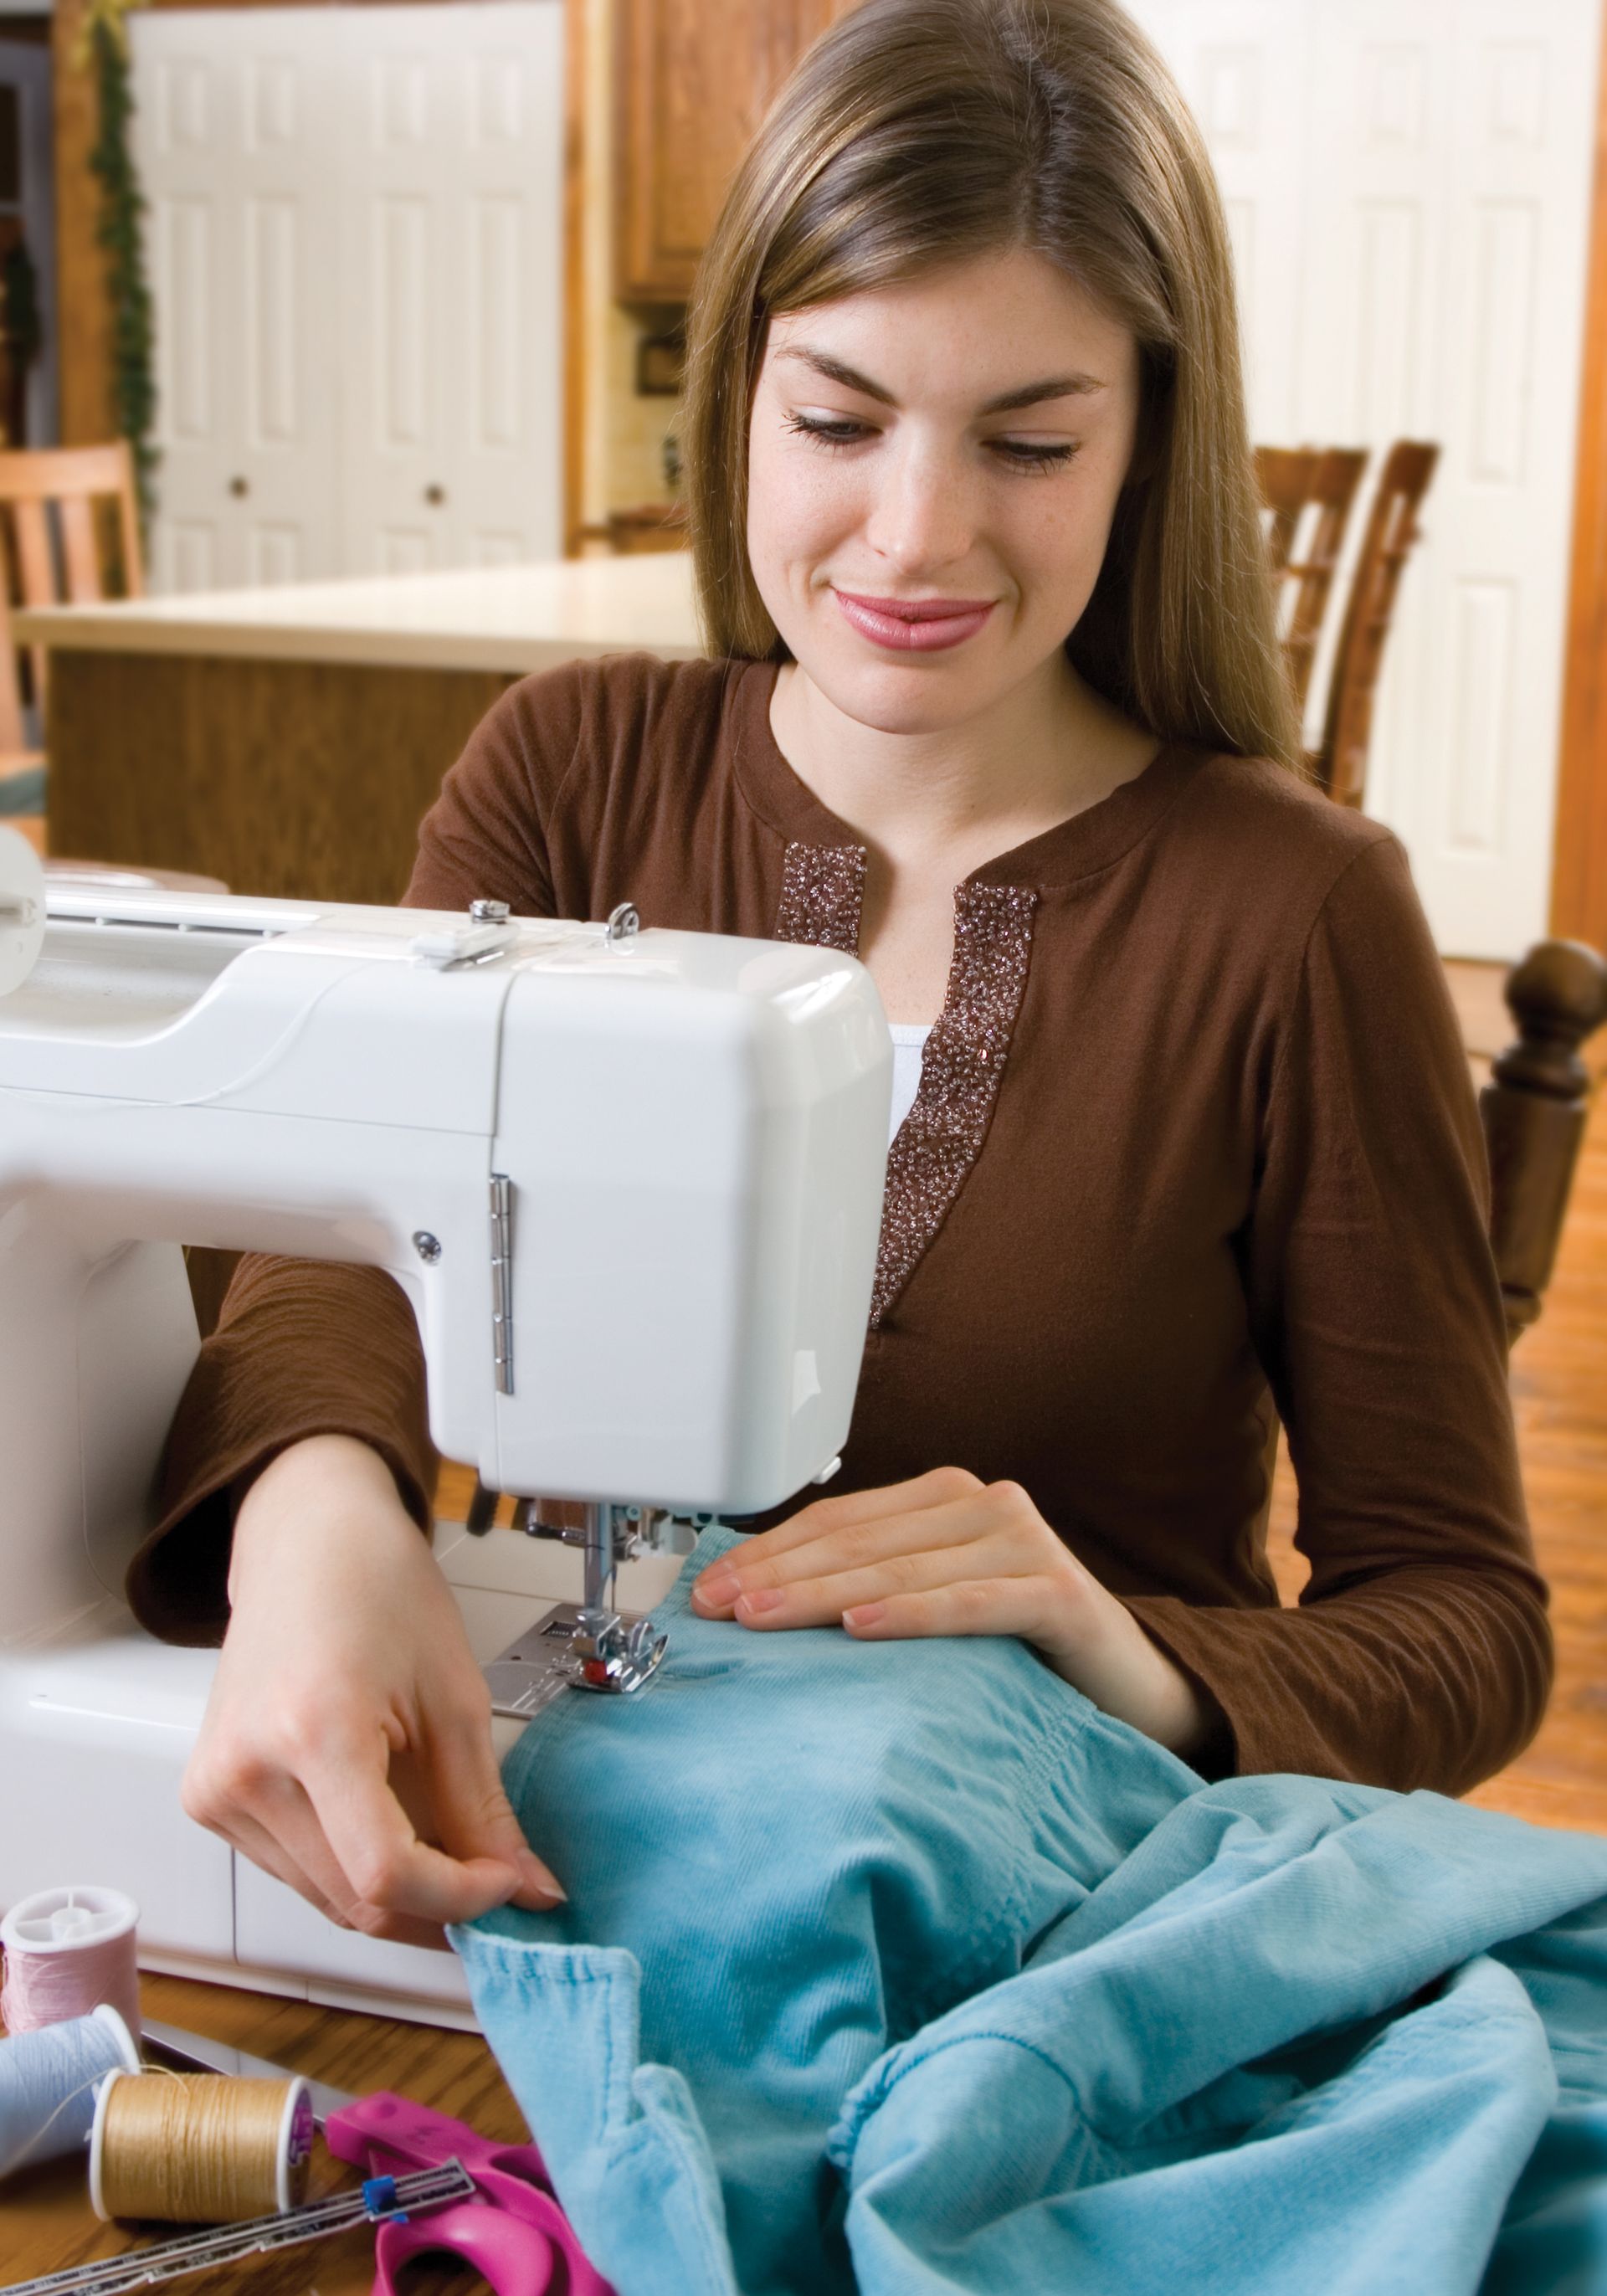 A young woman sits at a sewing machine and sews clothing.